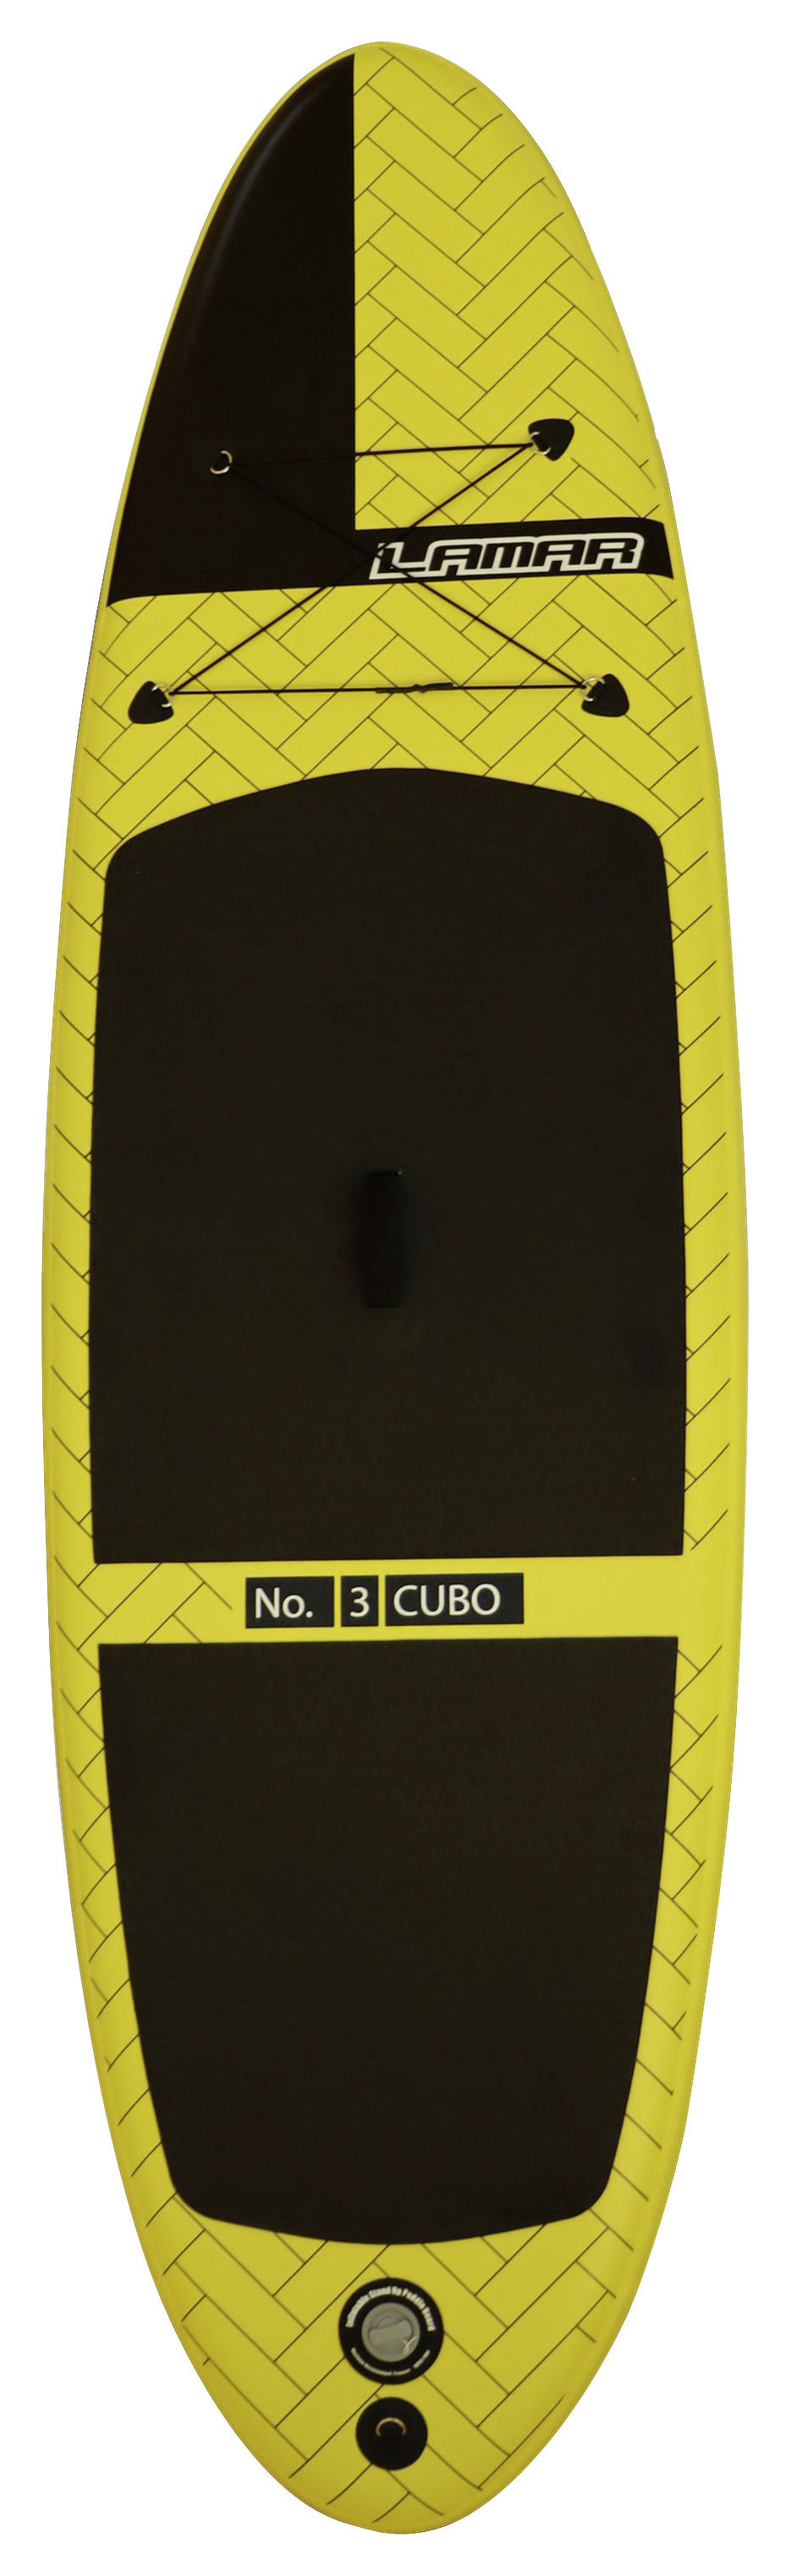 STAND UP PADDLE CUBO 305 TRE  - KONVENTIONELL, Kunststoff (305/84/15cm)